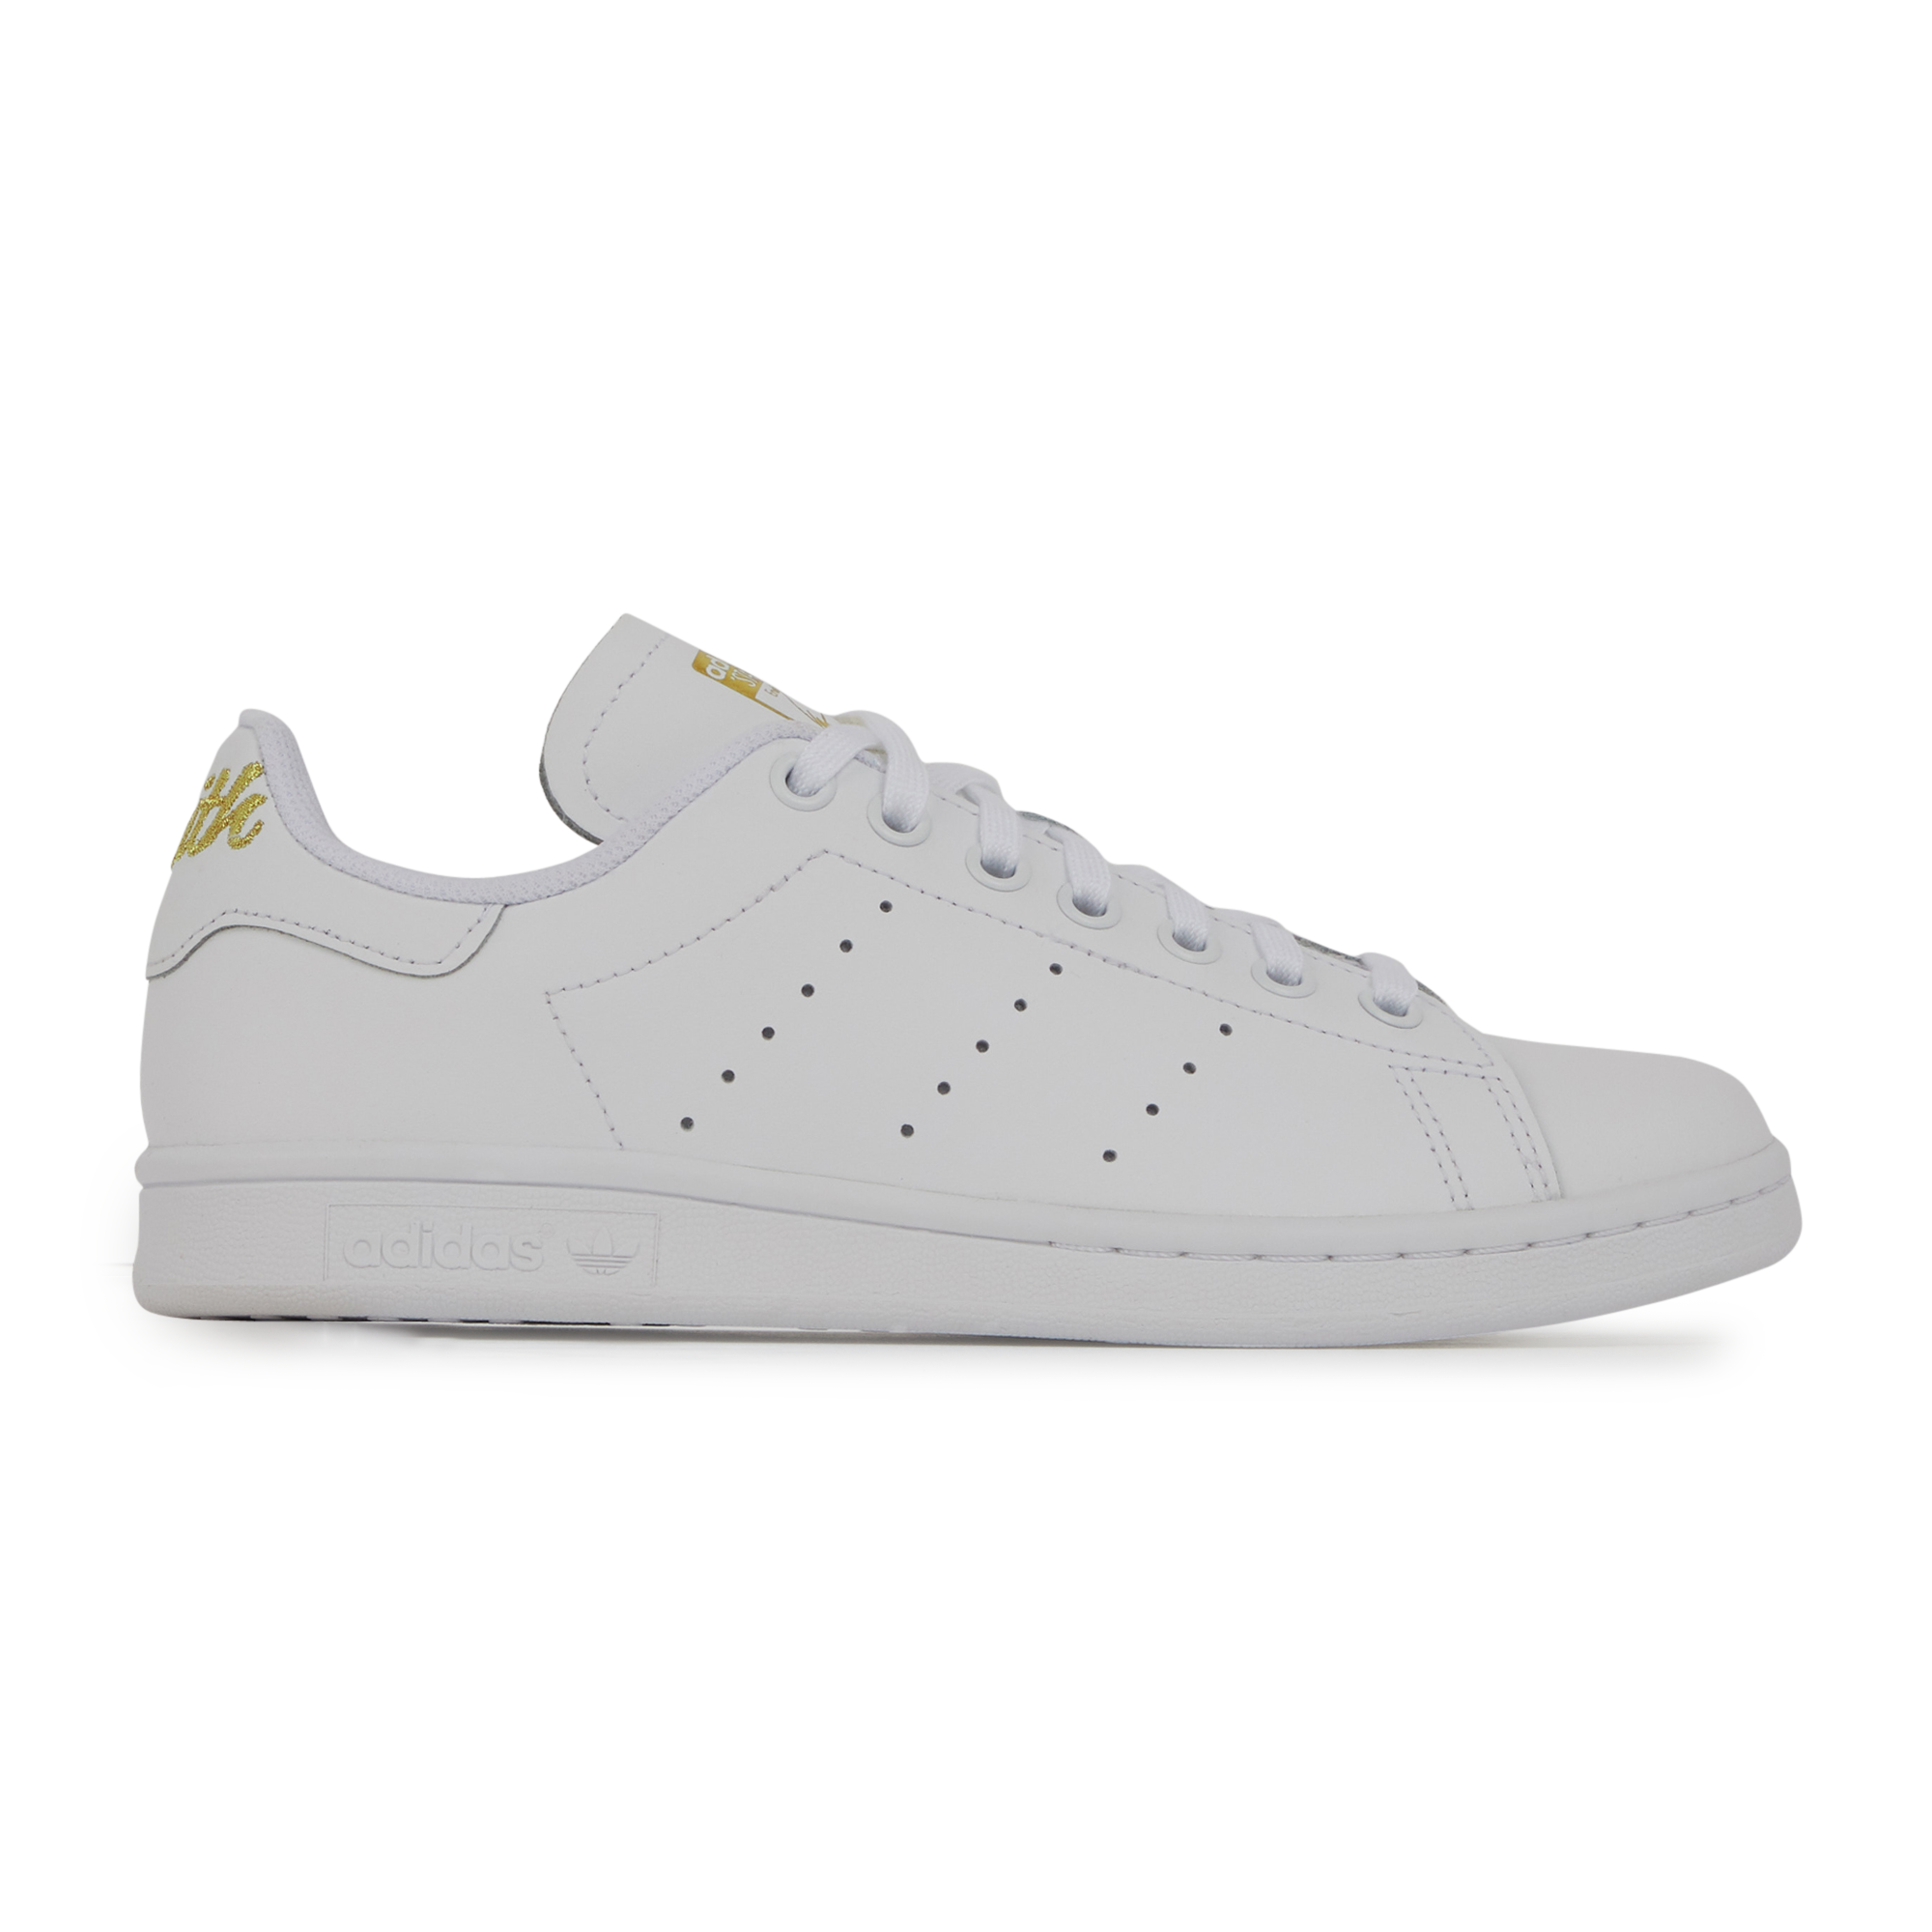 stan smith croco Gris homme